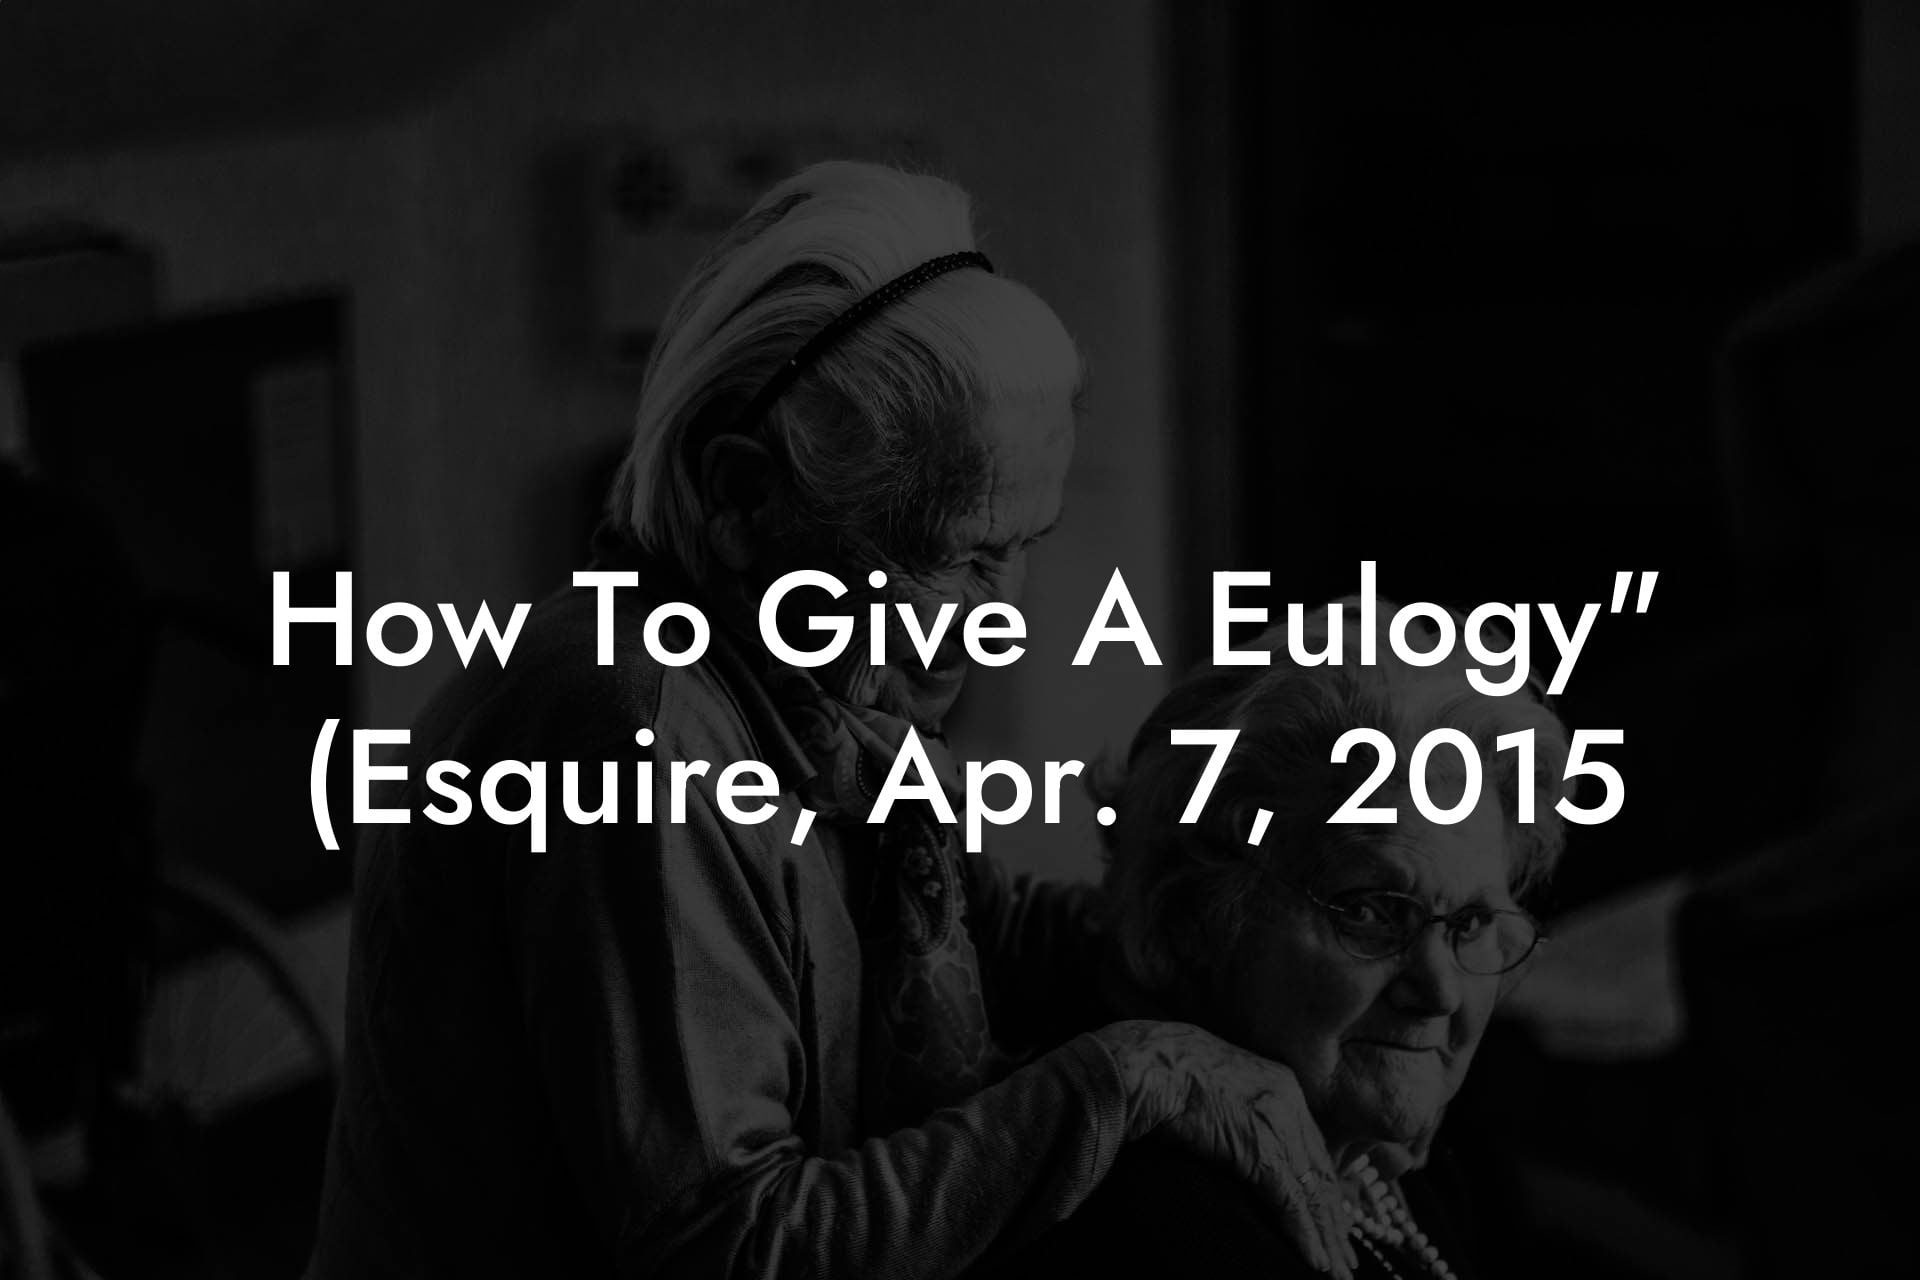 How To Give A Eulogy" (Esquire, Apr. 7, 2015